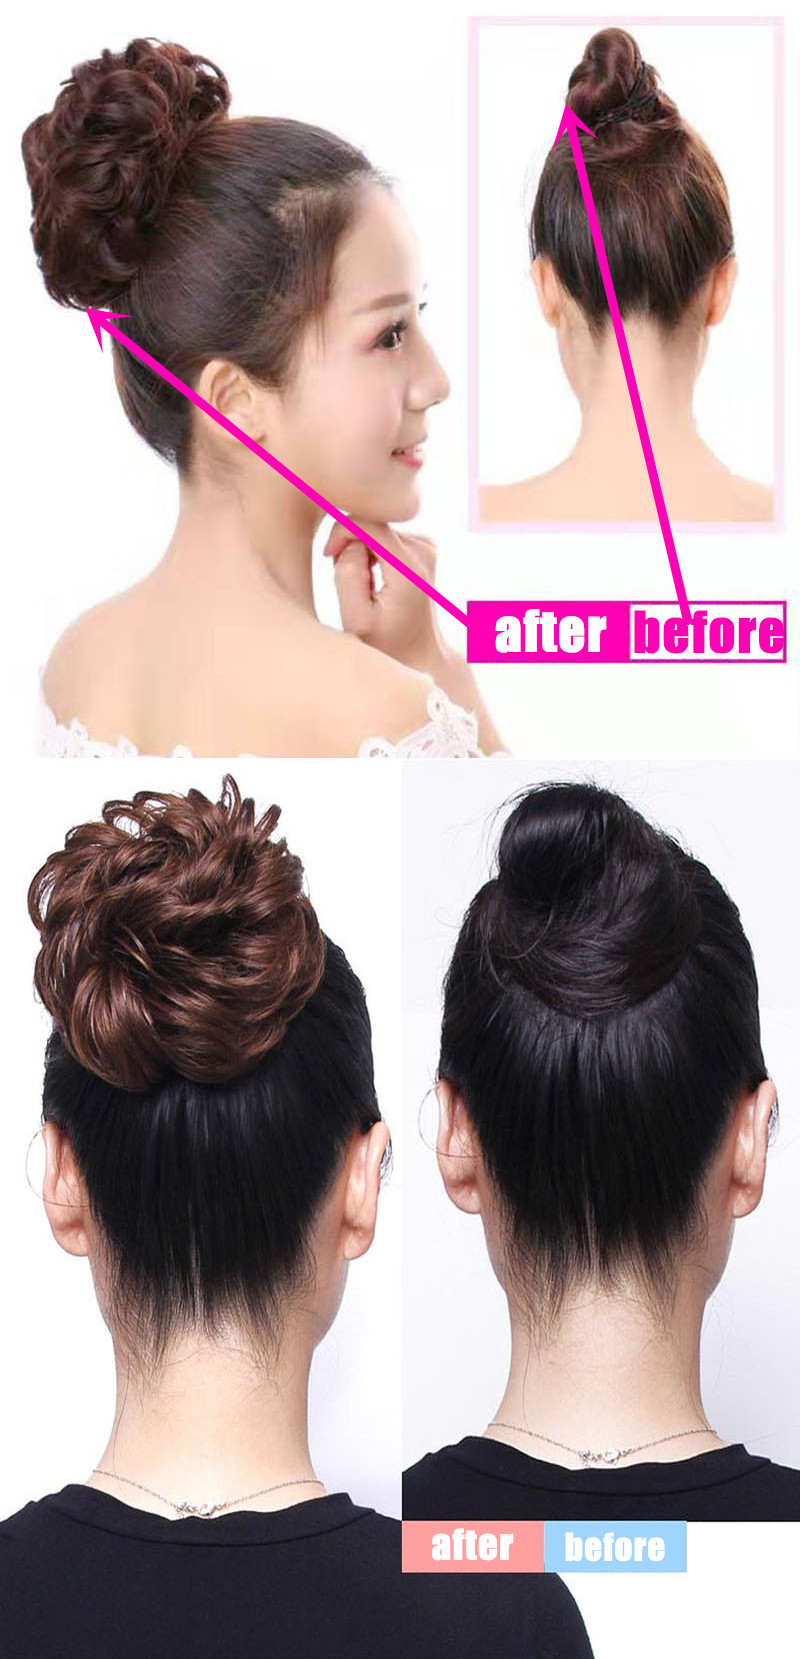 SHUOHAN Q5 Plus Vintage Synthetic High Temperature Fiber Curly Hair Bun Chignon Flower Bud Elastic Rubber Band Rope